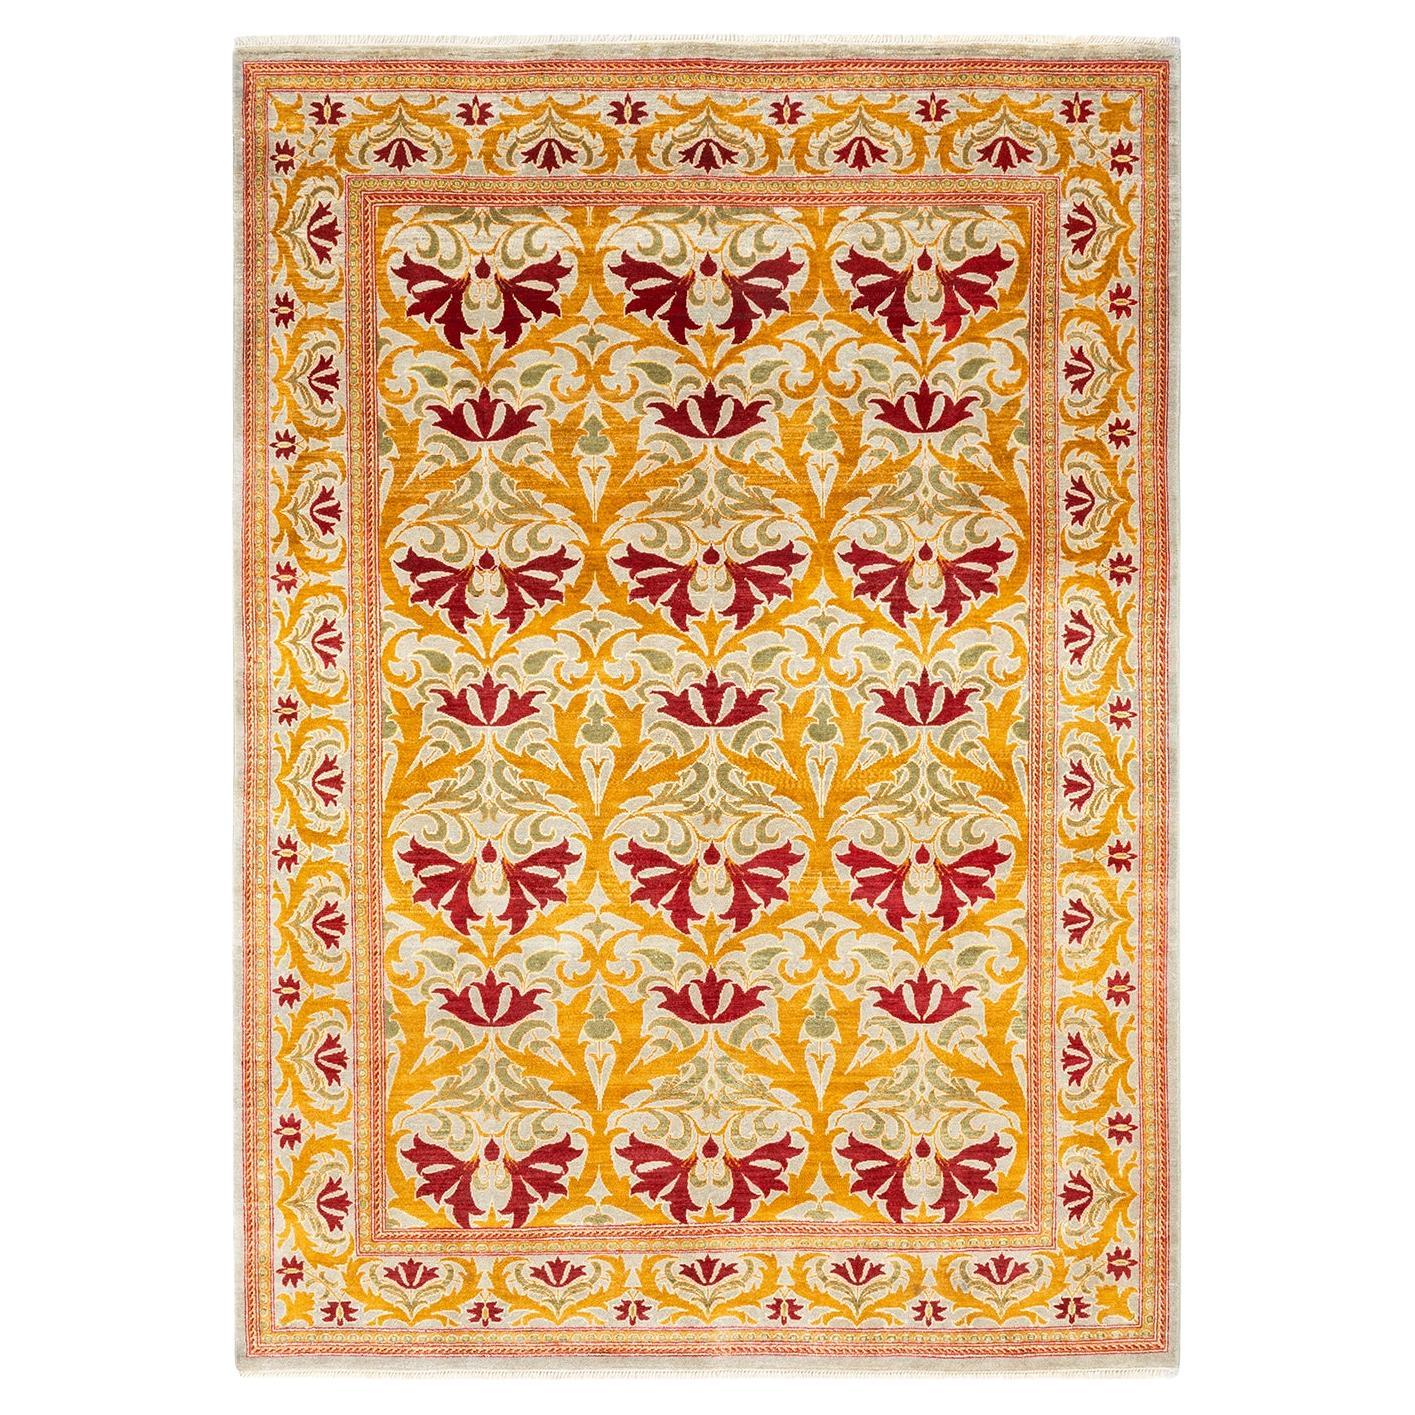 Contemporary Arts & Crafts Hand Knotted Wool Ivory Area Rug im Angebot